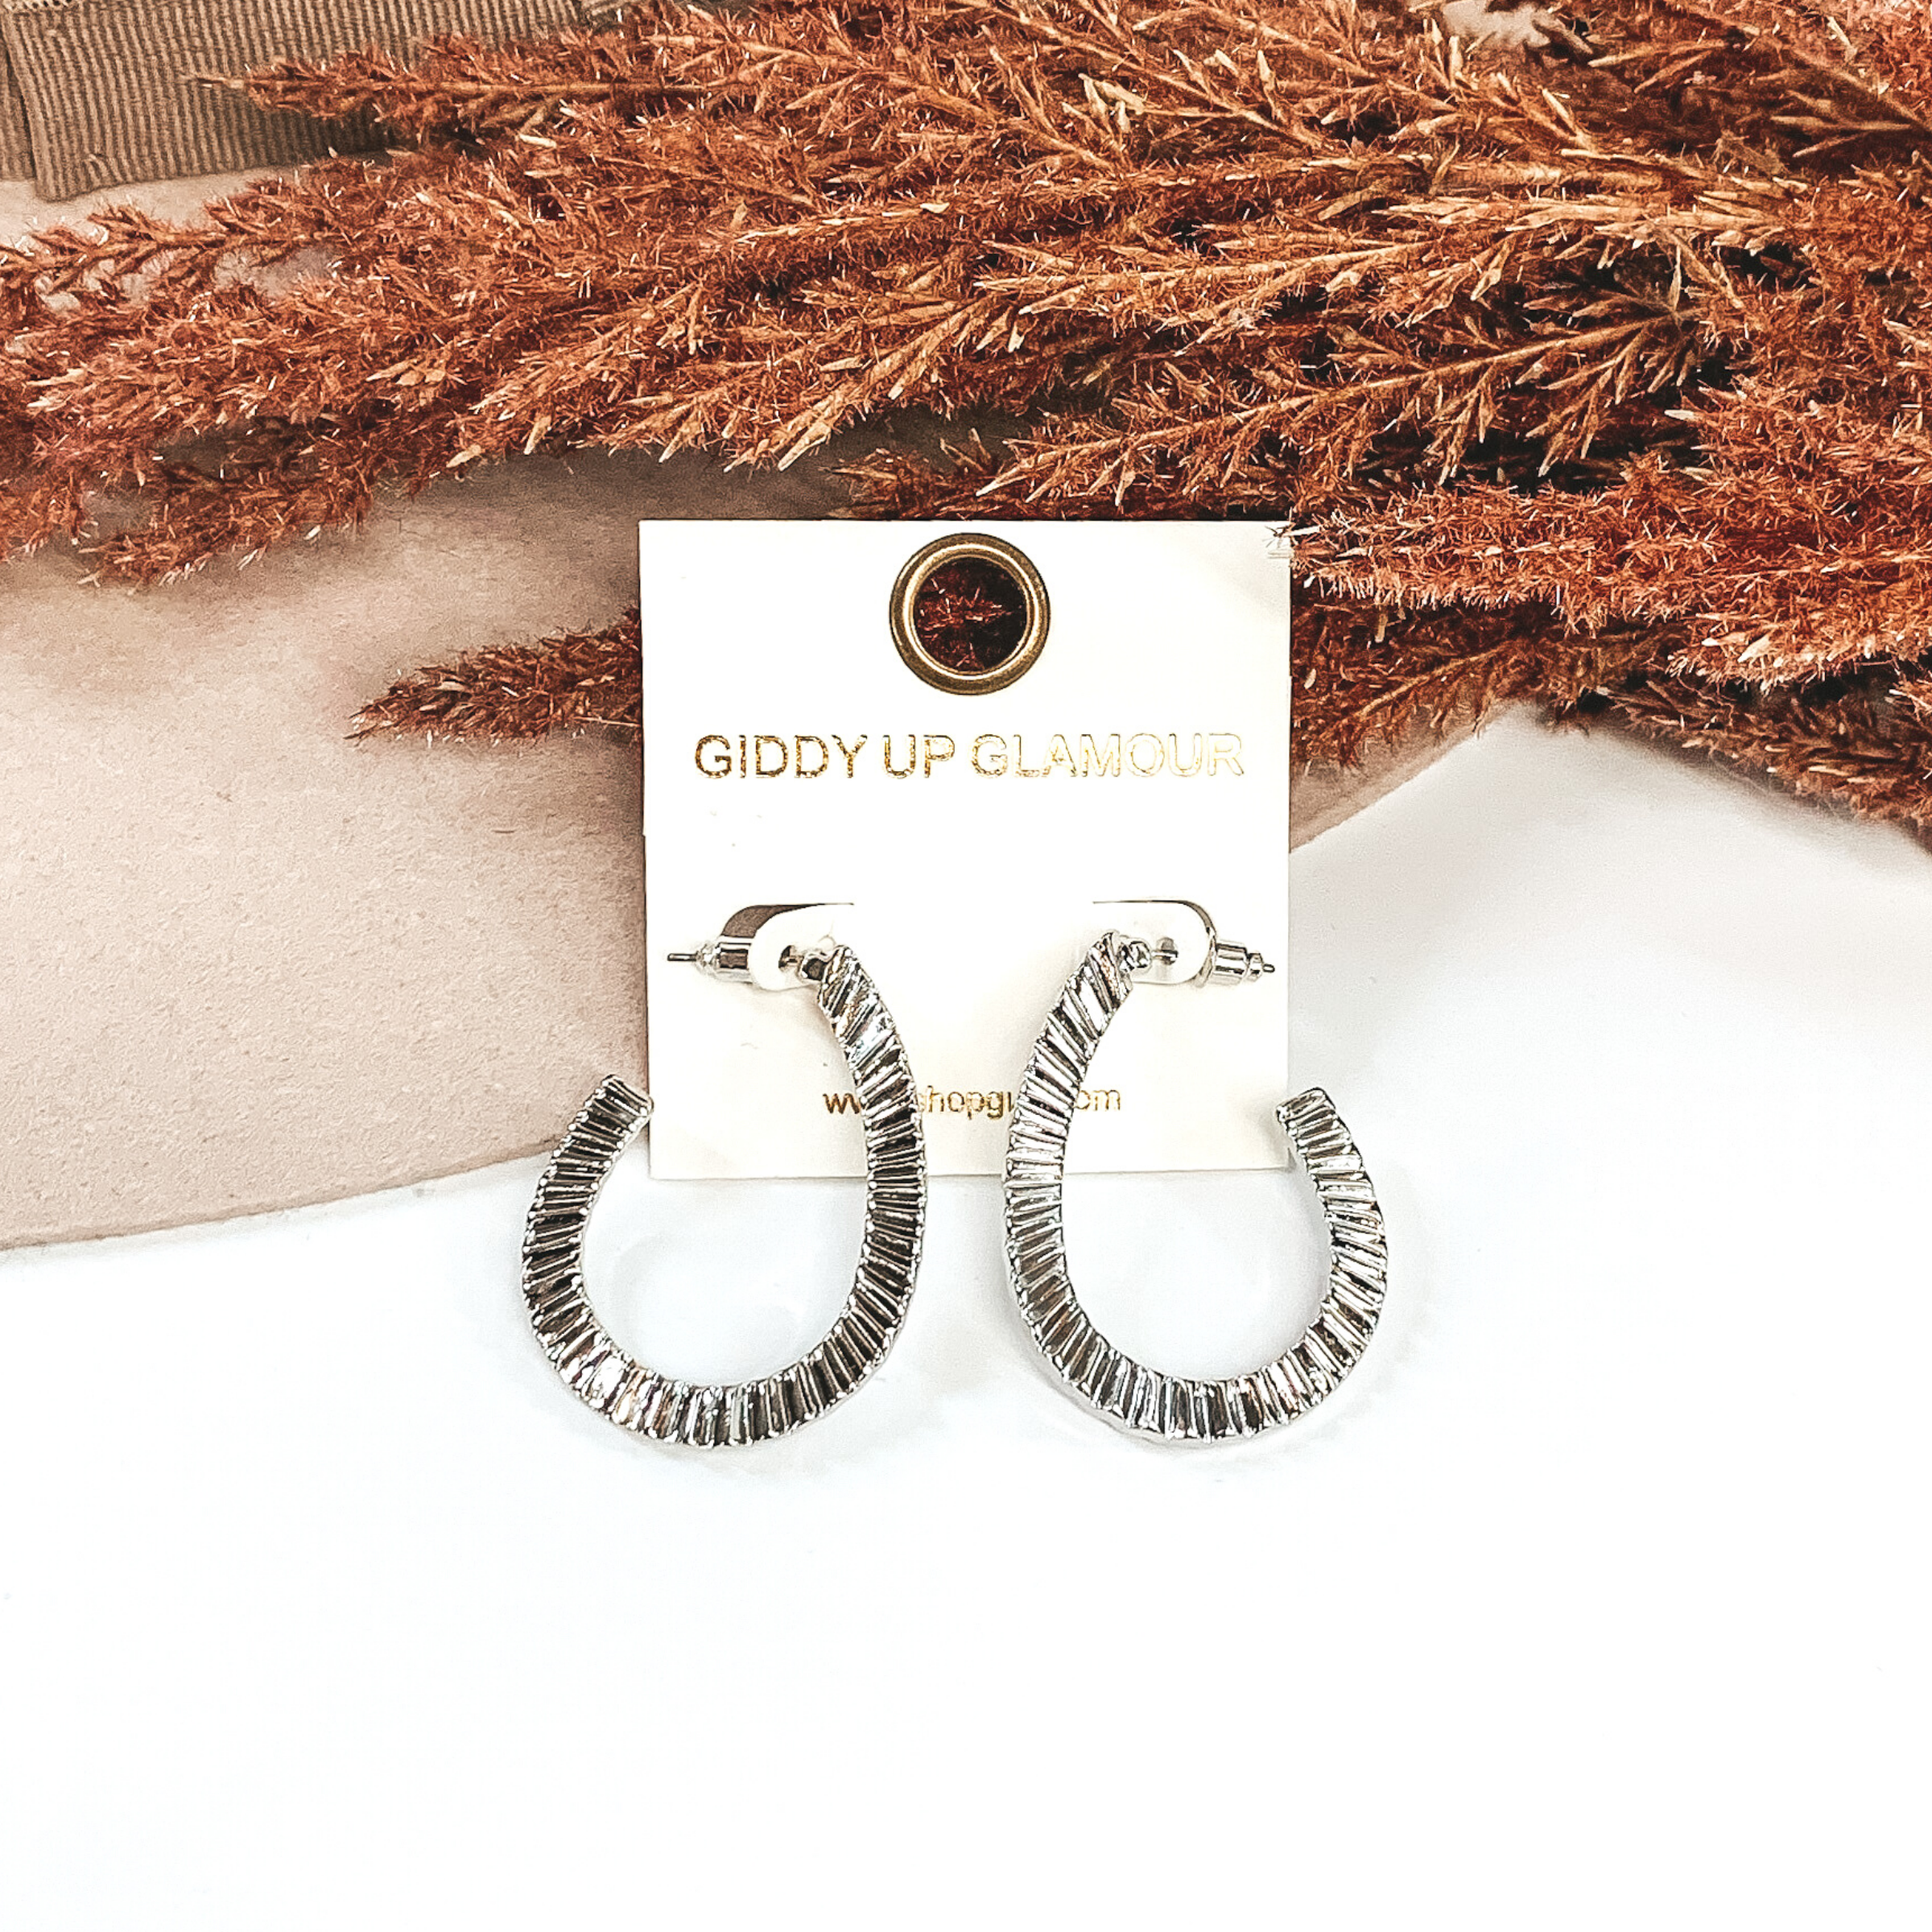 Textured open teardrop earrings in silver that are pictured hanging on a white square earring holder. These earrings are laid on a white and beige background with some brown floral at the top.